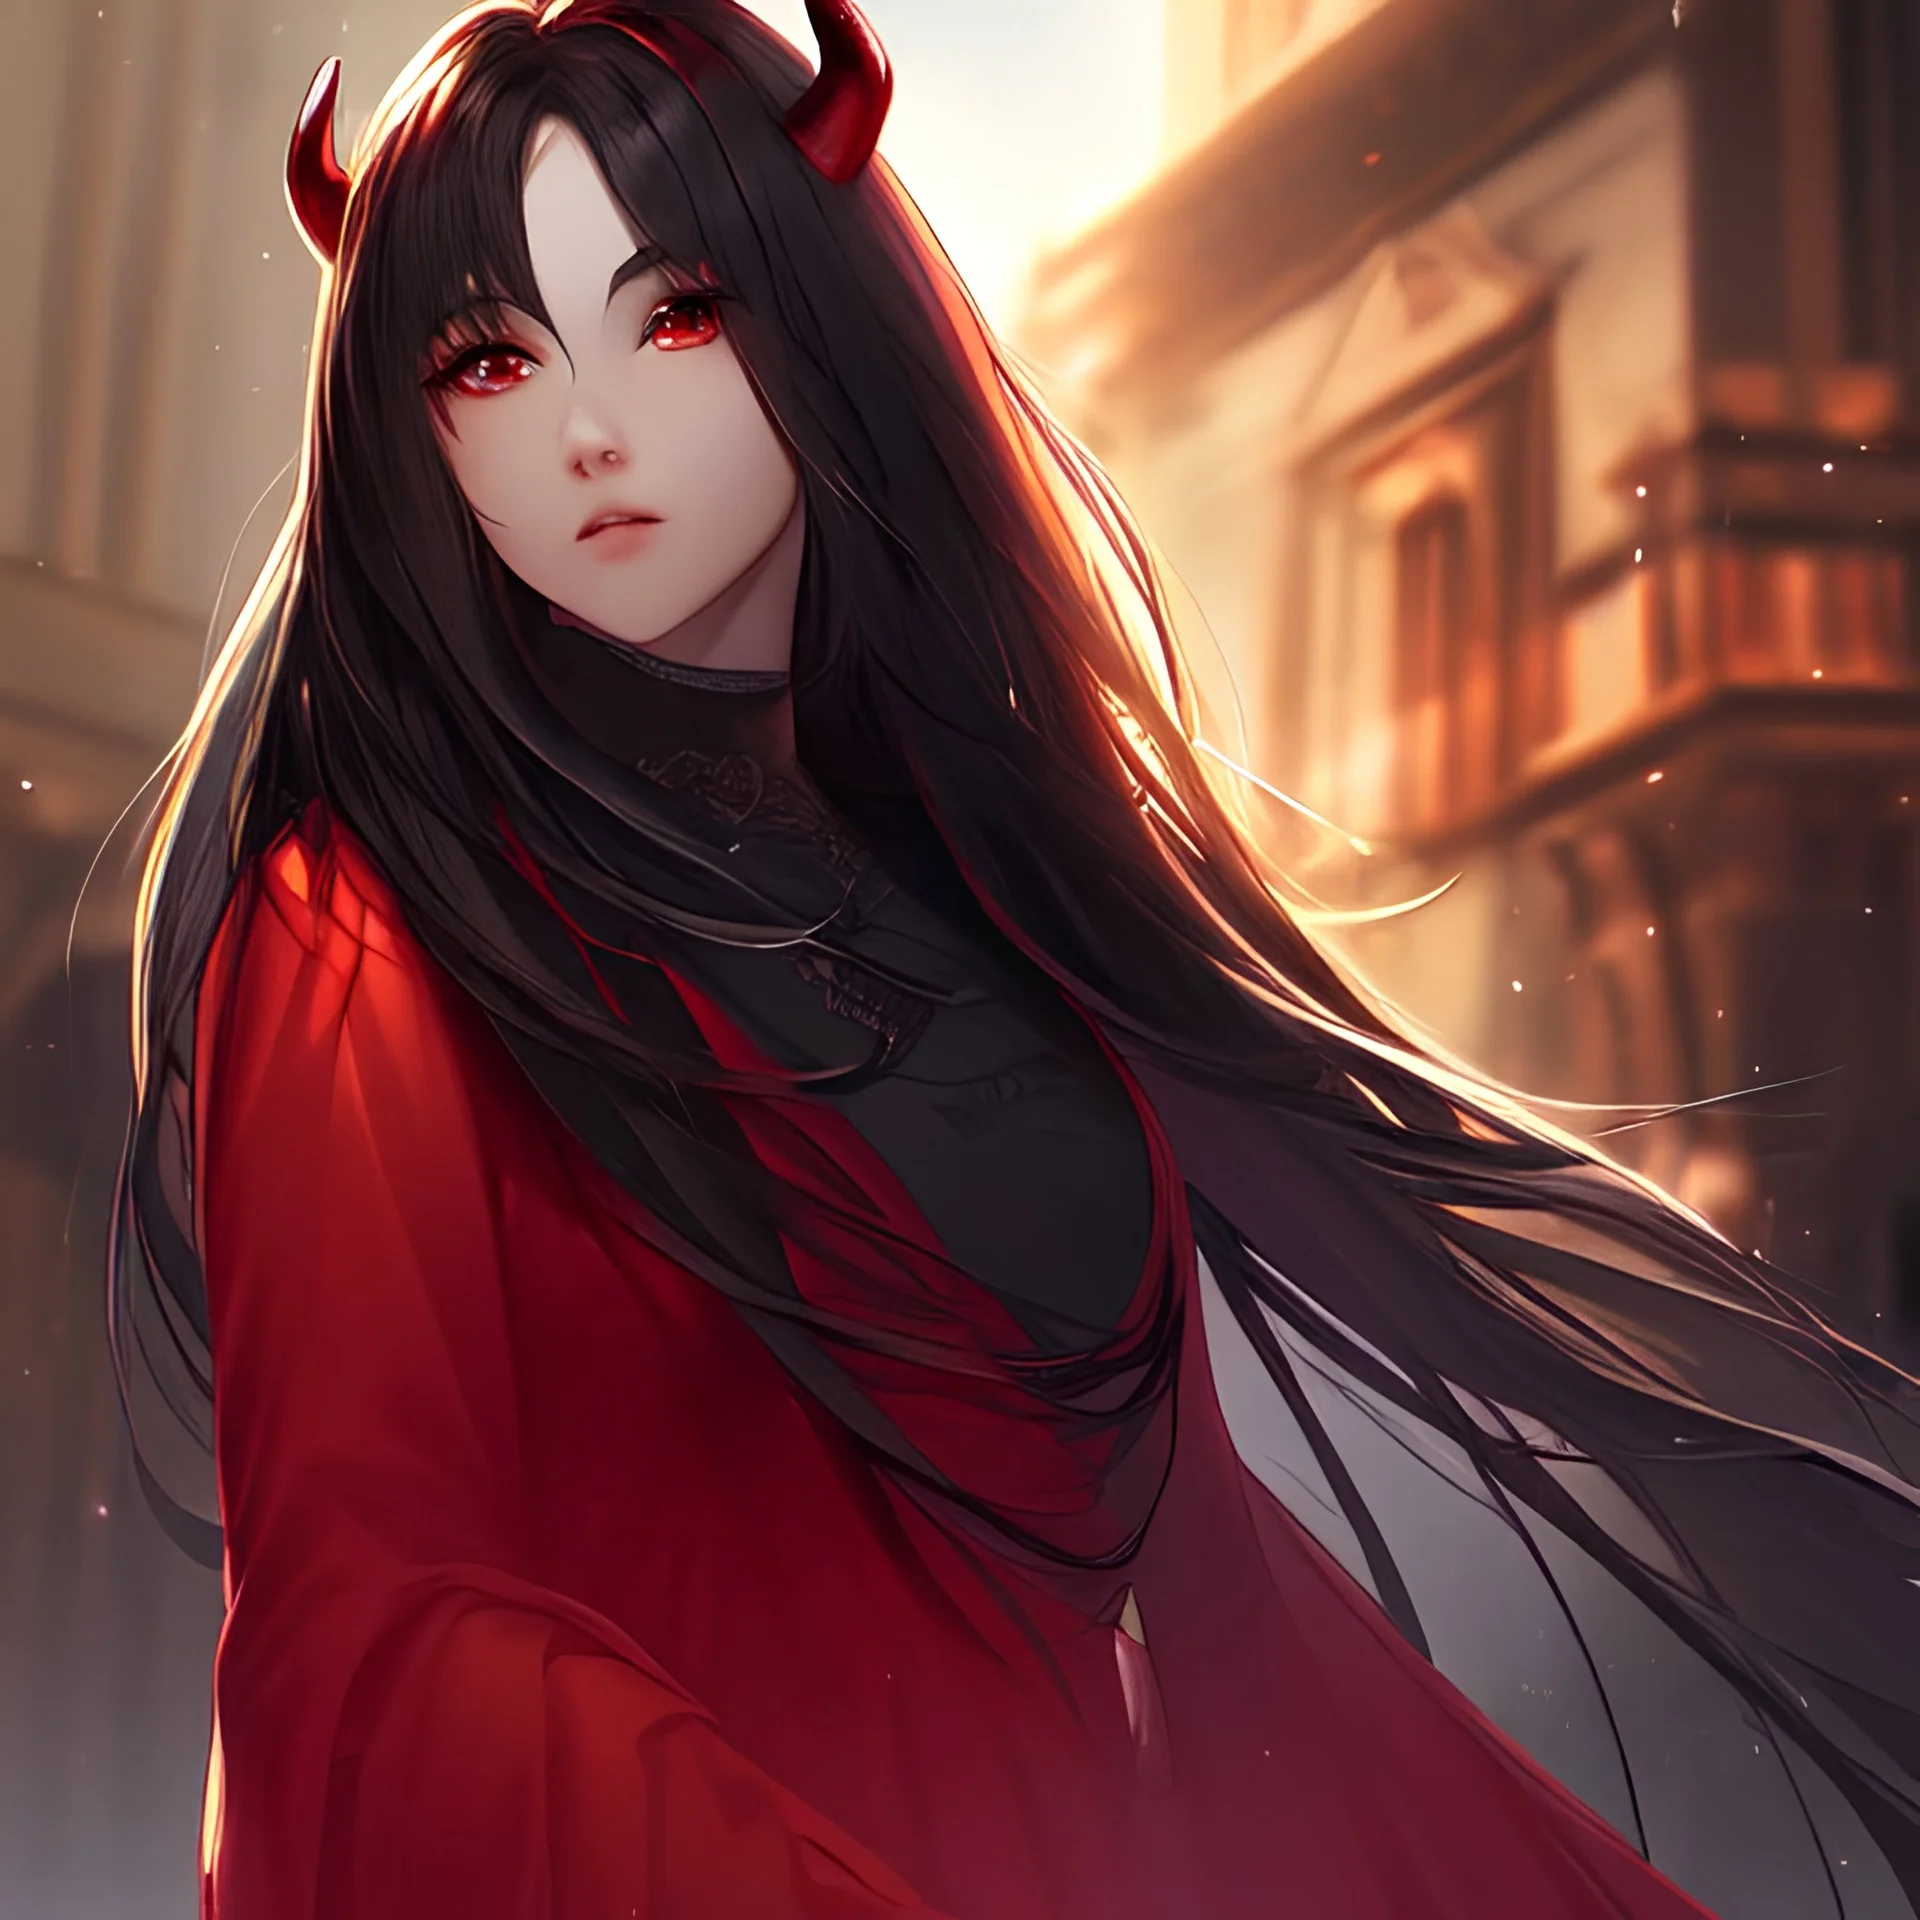 Clear focus,High resolution,High quality, Black long hair, Red eyes, Red horns, Realistic